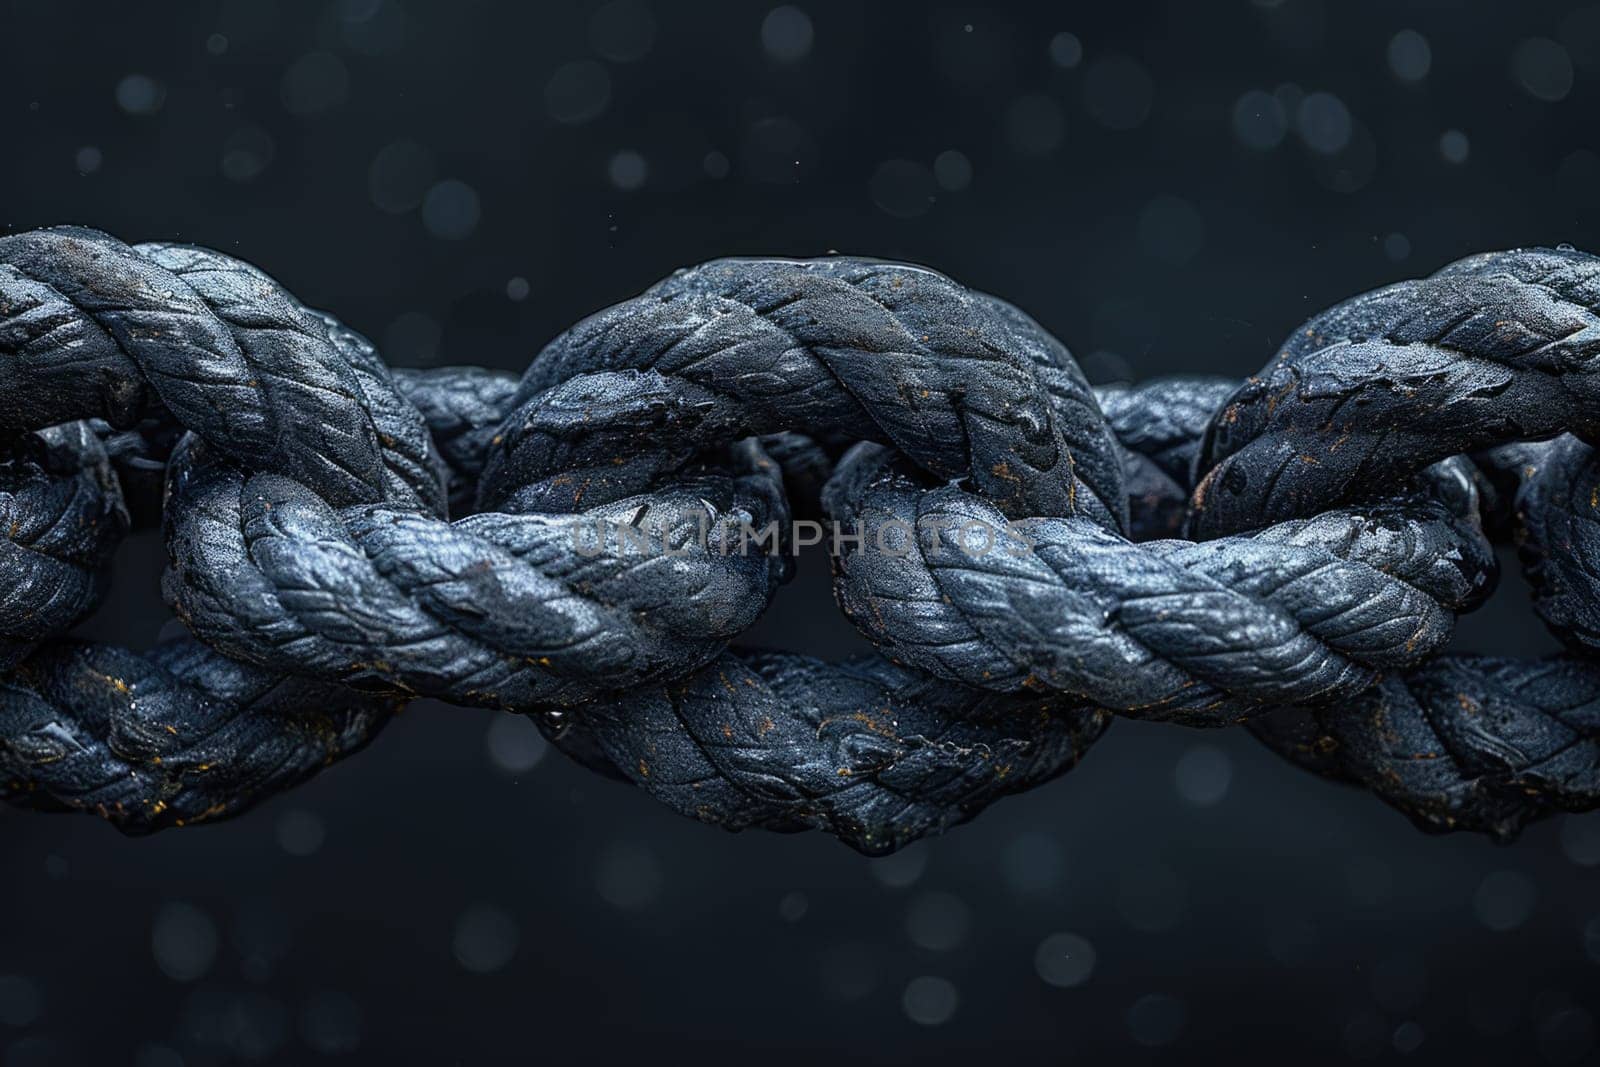 Detailed close up of a rope against a black background.